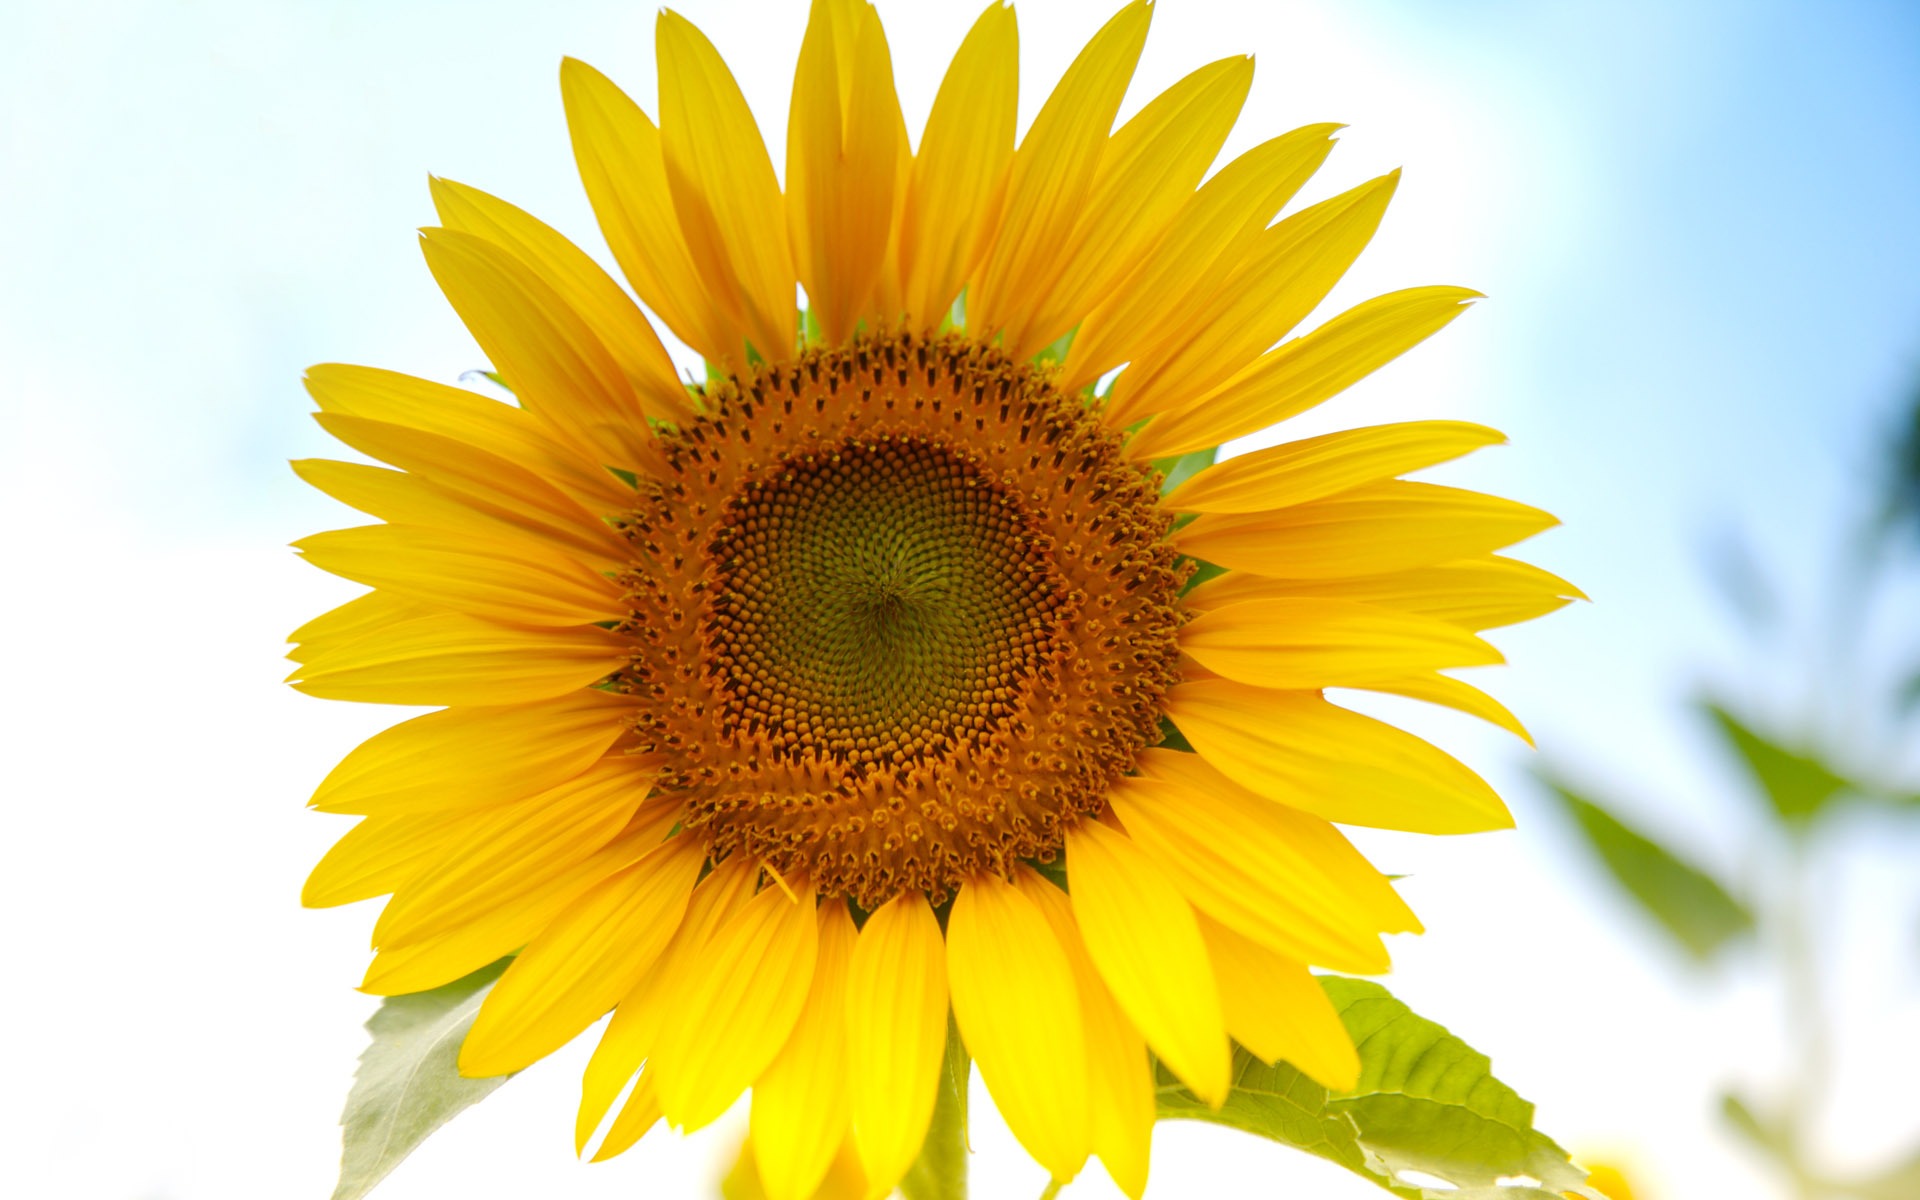 Sunny sunflower photo HD Wallpapers #5 - 1920x1200